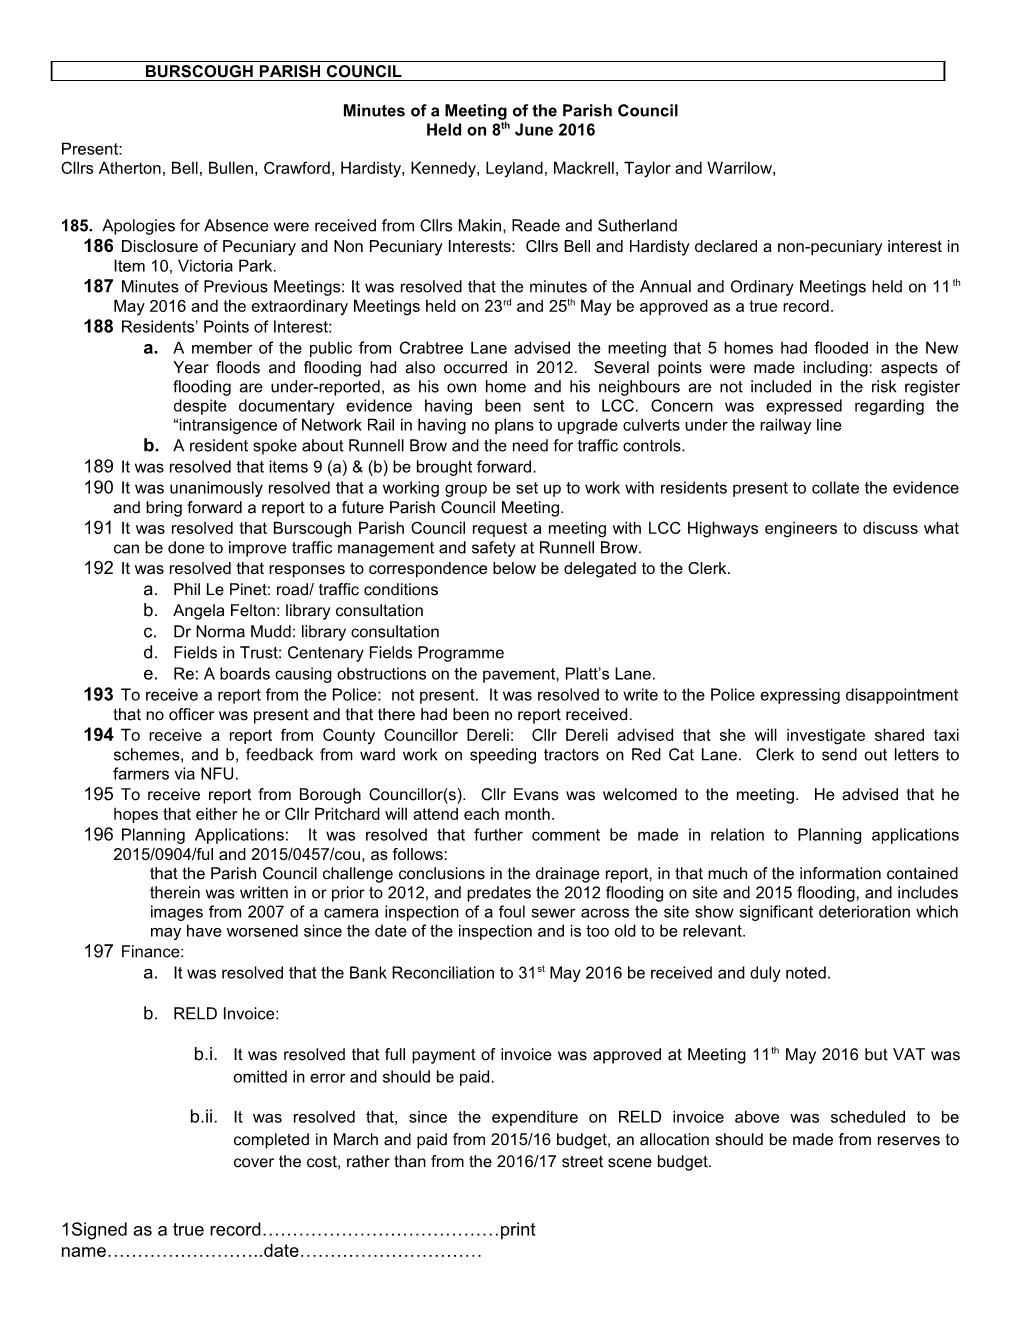 Minutes of a Meeting of the Parish Council